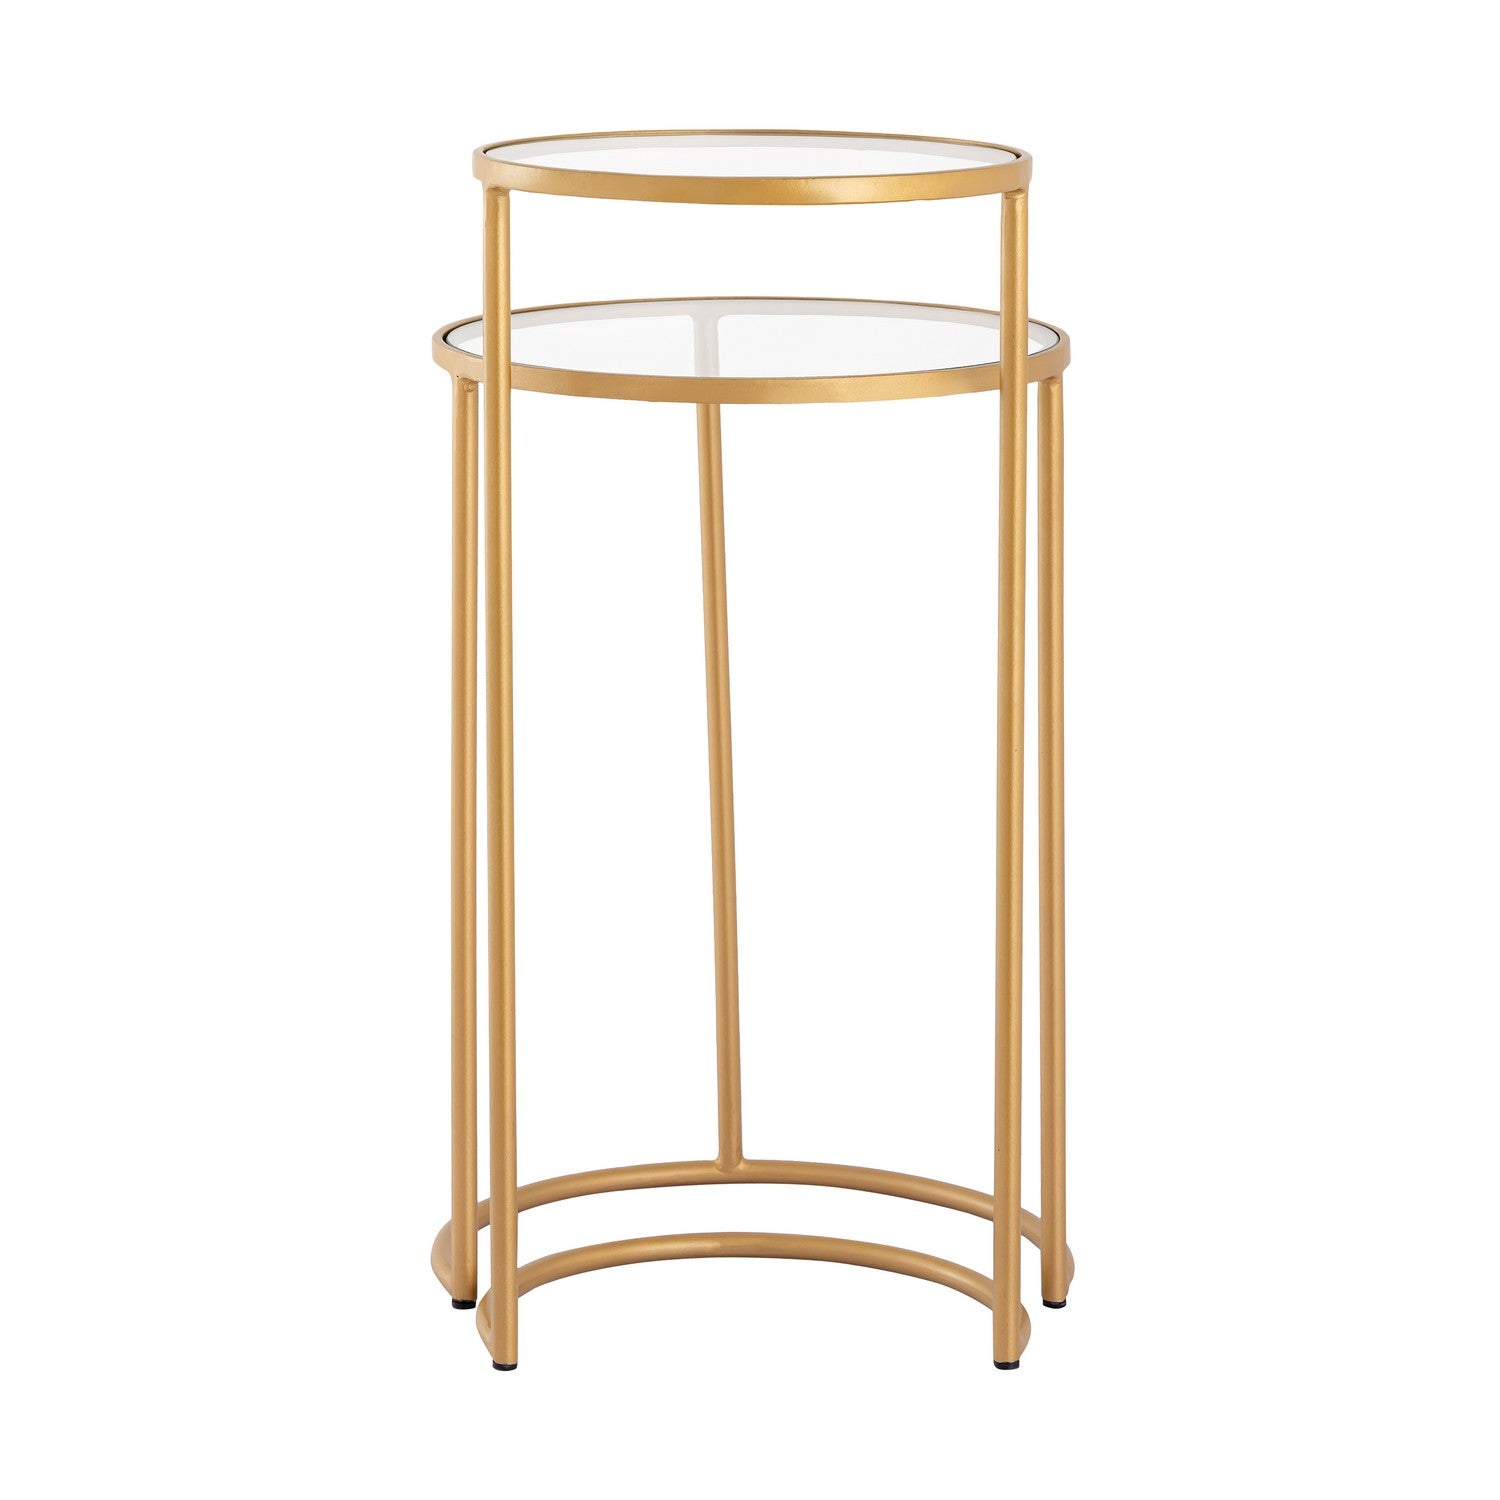 ELK Home - S0805-11201/S2 - Accent Table - Marino - Gold